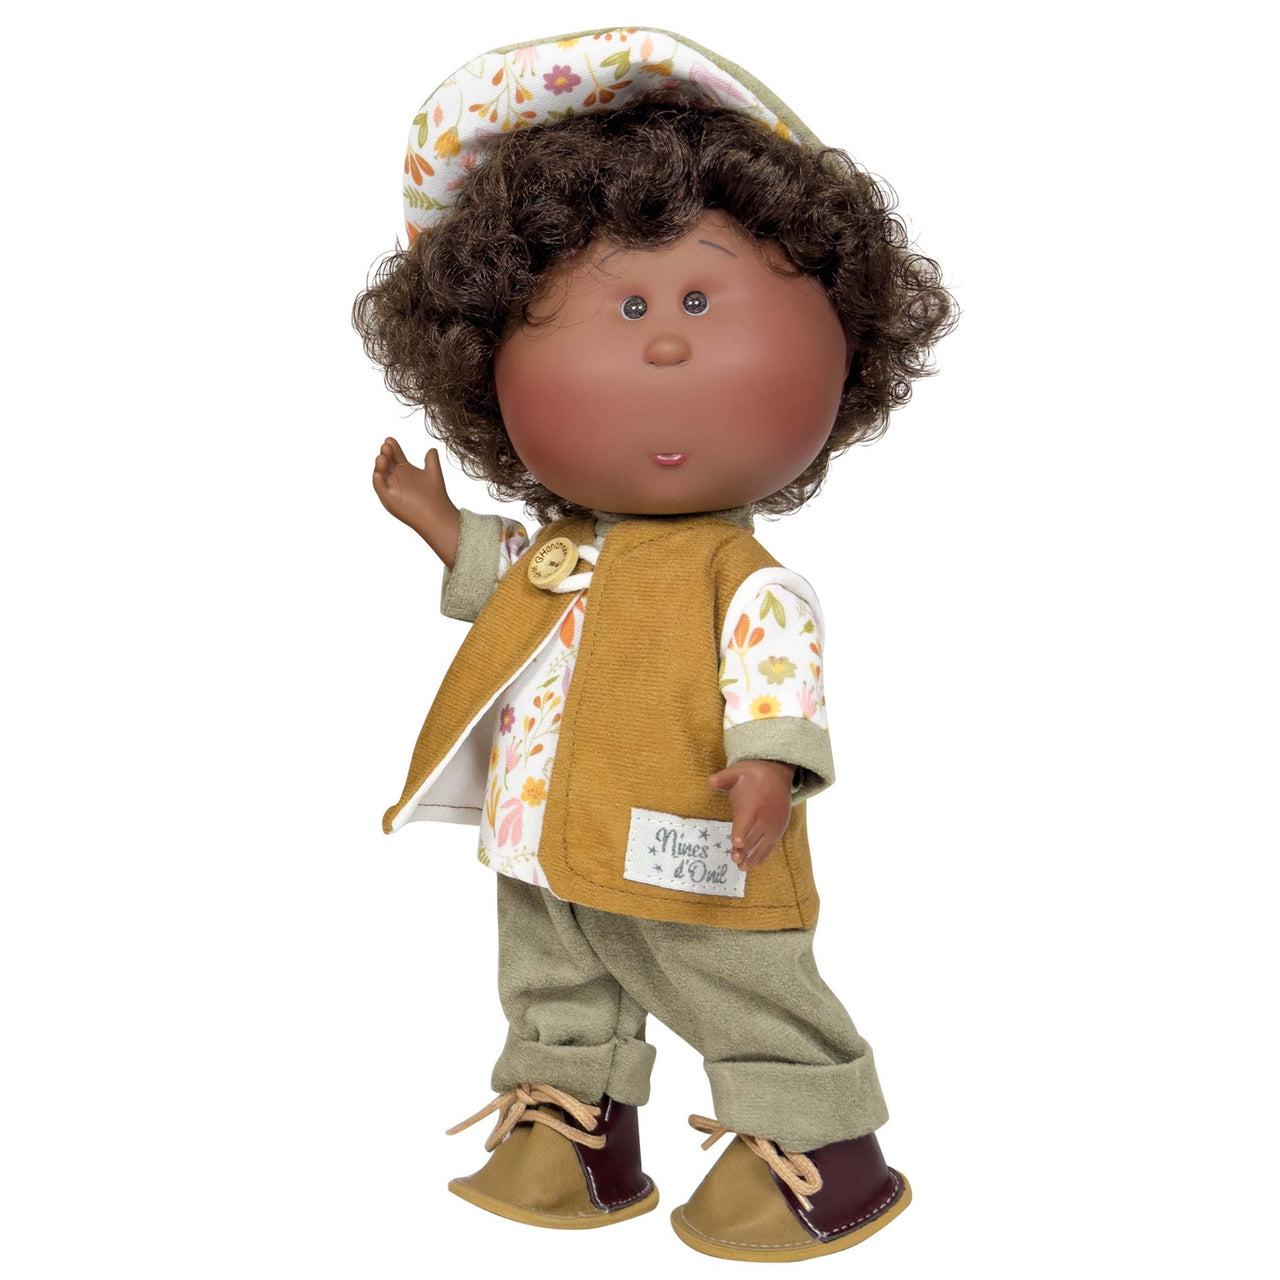 August - Fully Dressed LITTLE Mia Doll with Brown Hair